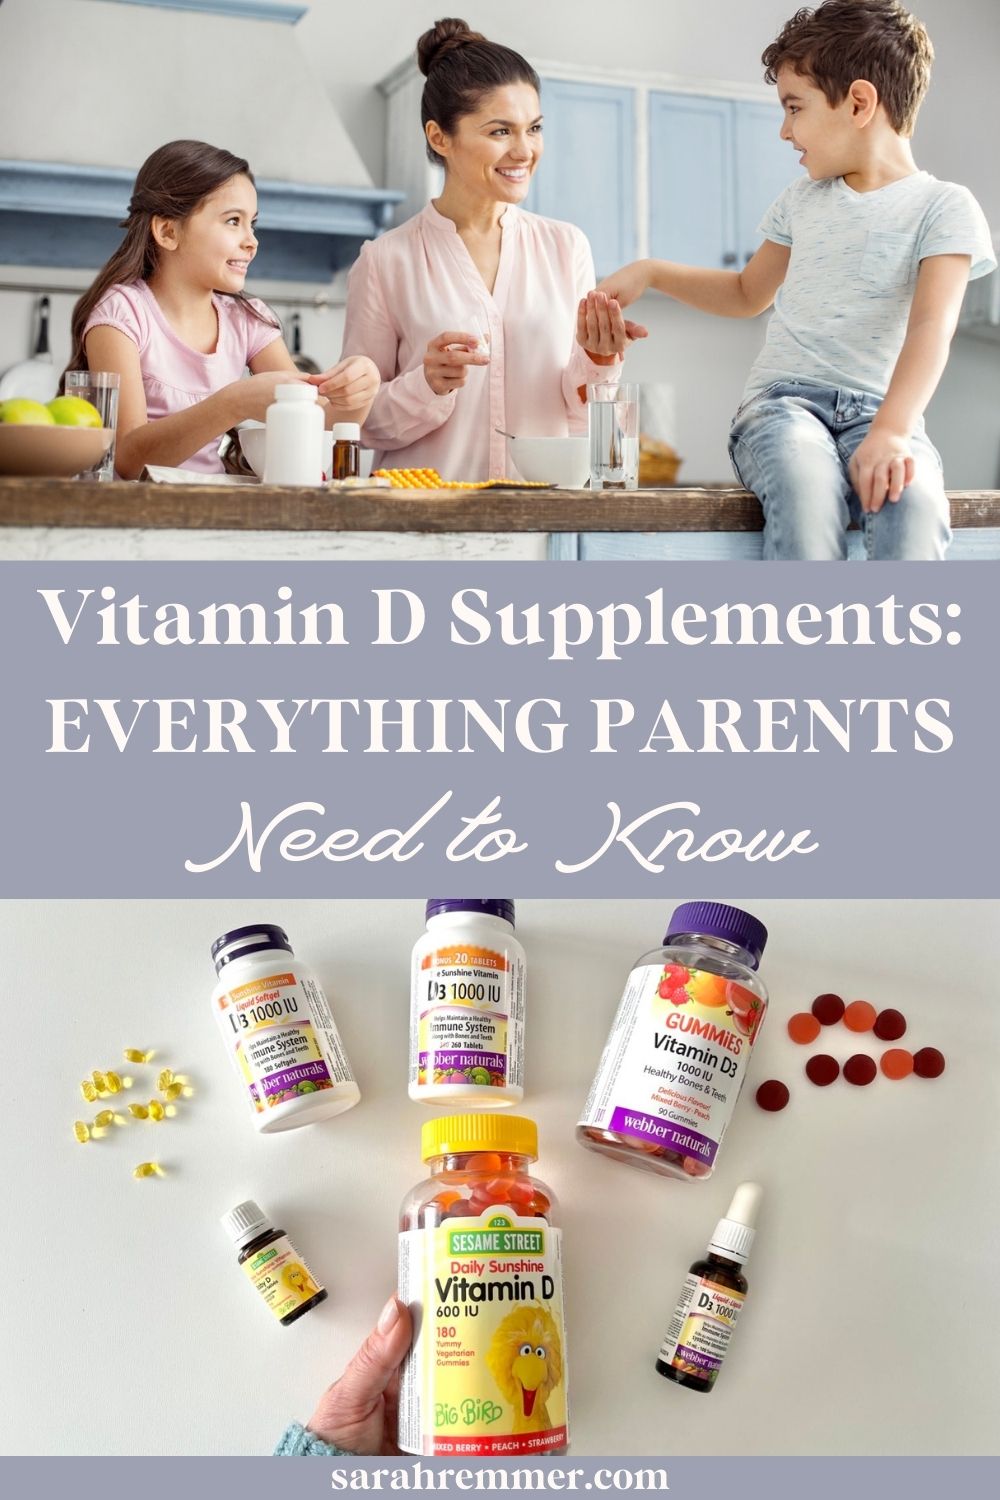 The information that you need to be aware of when it comes to vitamin D supplementation for your entire family.